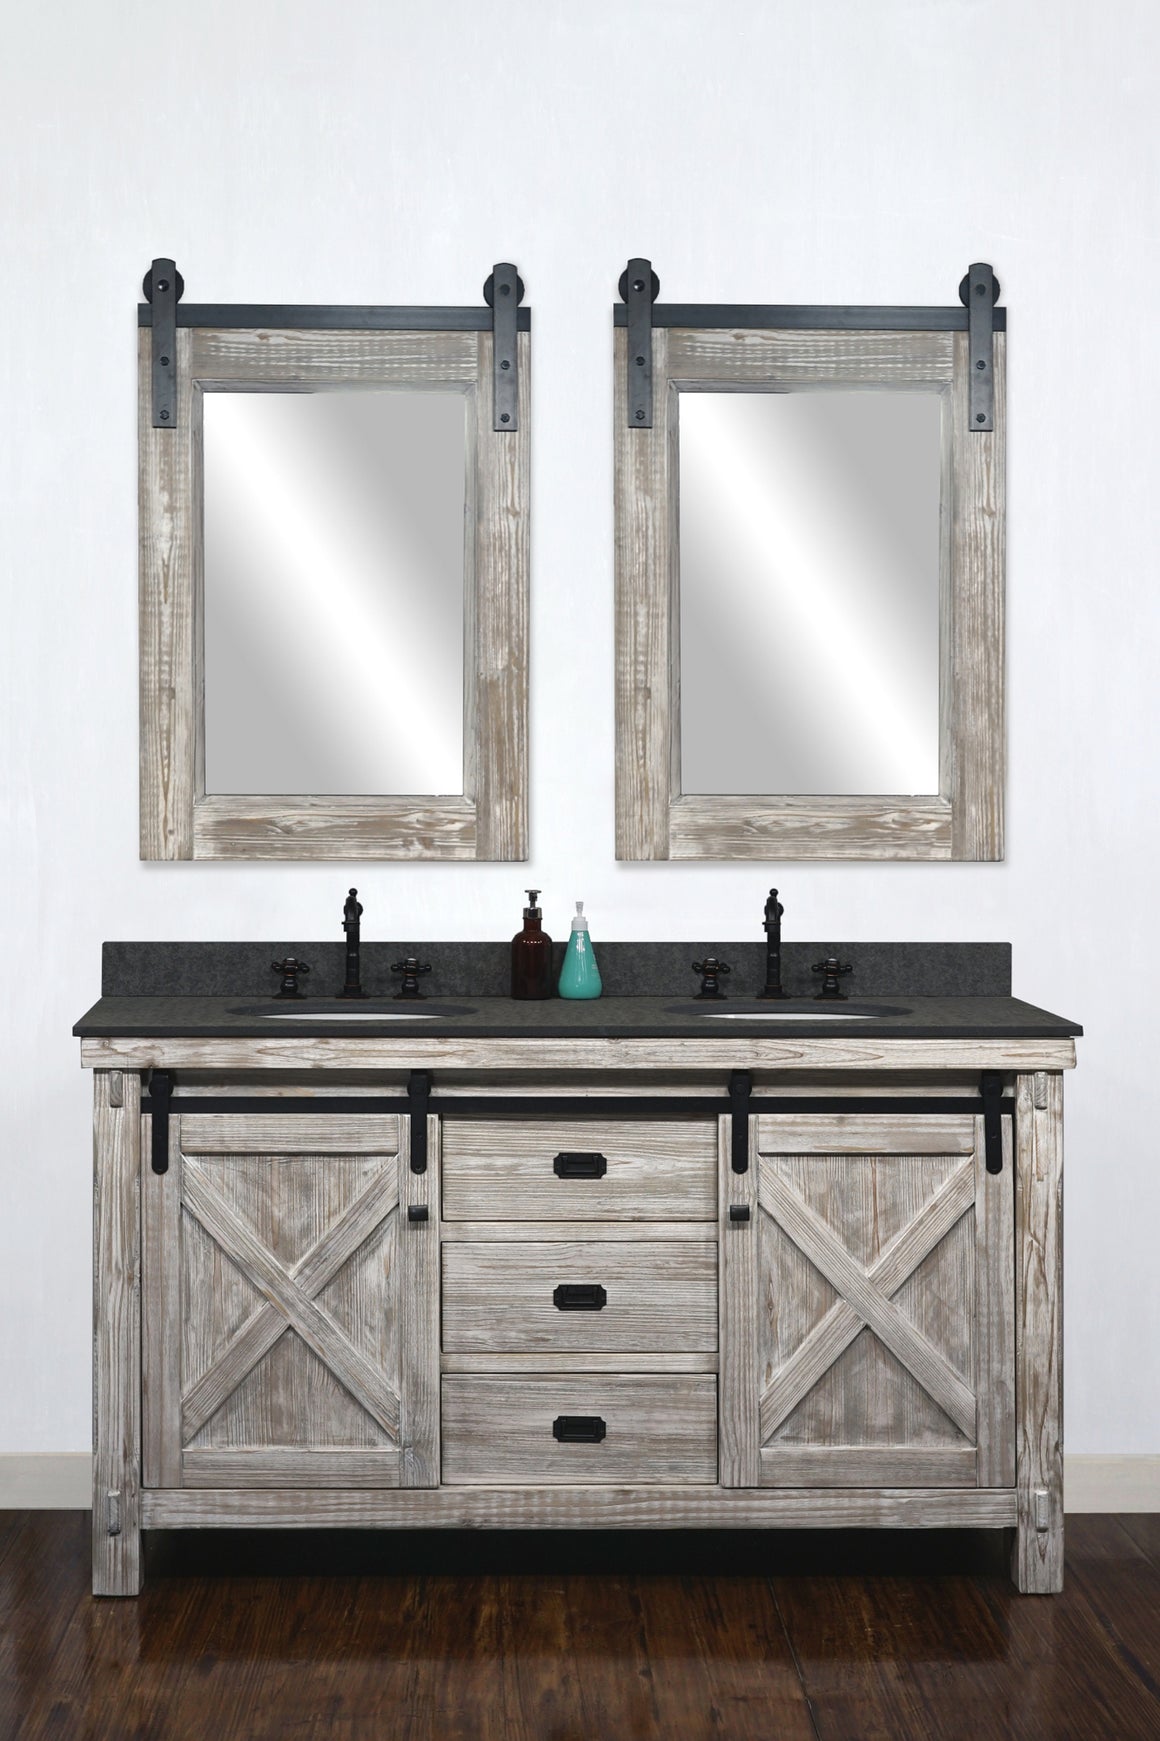 60"RUSTIC SOLID FIR BARN DOOR STYLE DOUBLE SINKS VANITY IN WHITE WASH WITH RUSTIC STYLE POLISHED TEXTURED SURFACE GRANITE TOP IN MATTE GREY-NO FAUCET